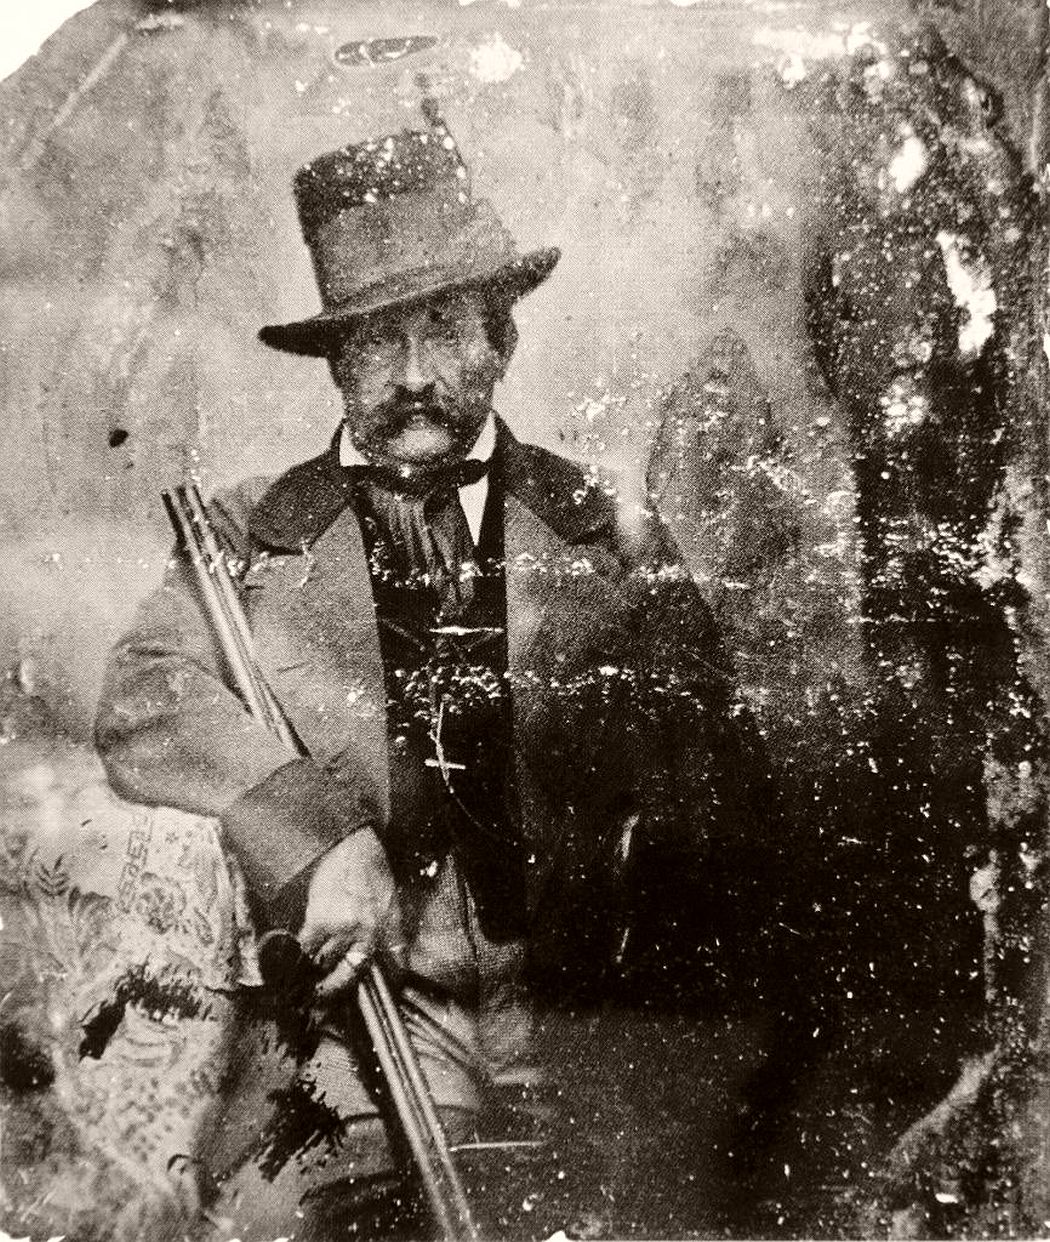 A portrait of a man" (his brother-in-law) hyalotype, 1855.